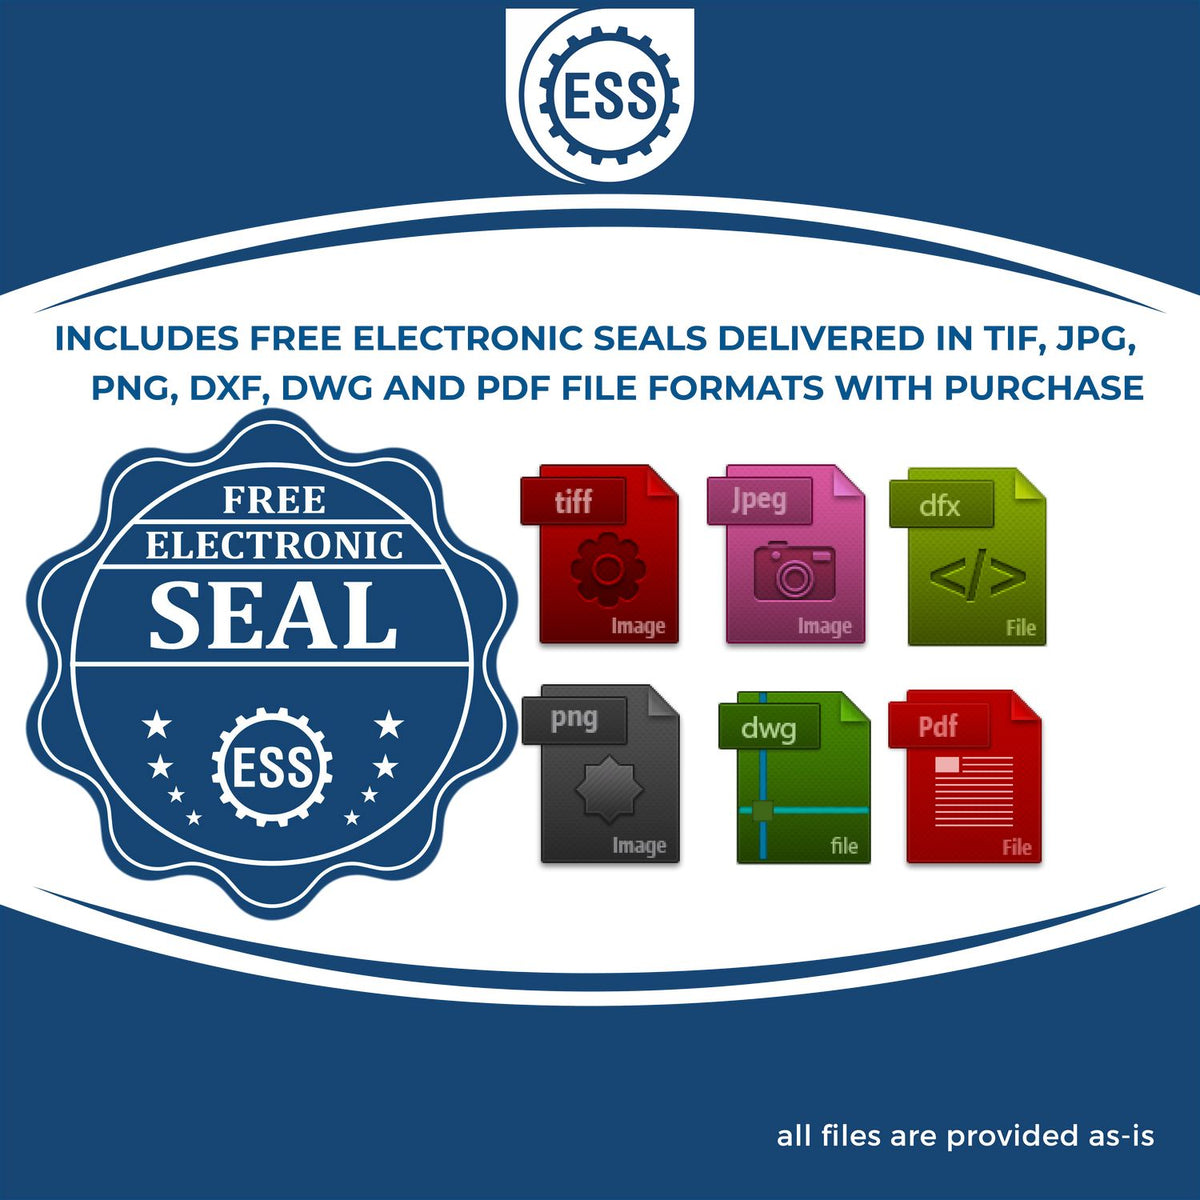 An infographic for the free electronic seal for the Slim Pre-Inked Kentucky Professional Geologist Seal Stamp illustrating the different file type icons such as DXF, DWG, TIF, JPG and PNG.